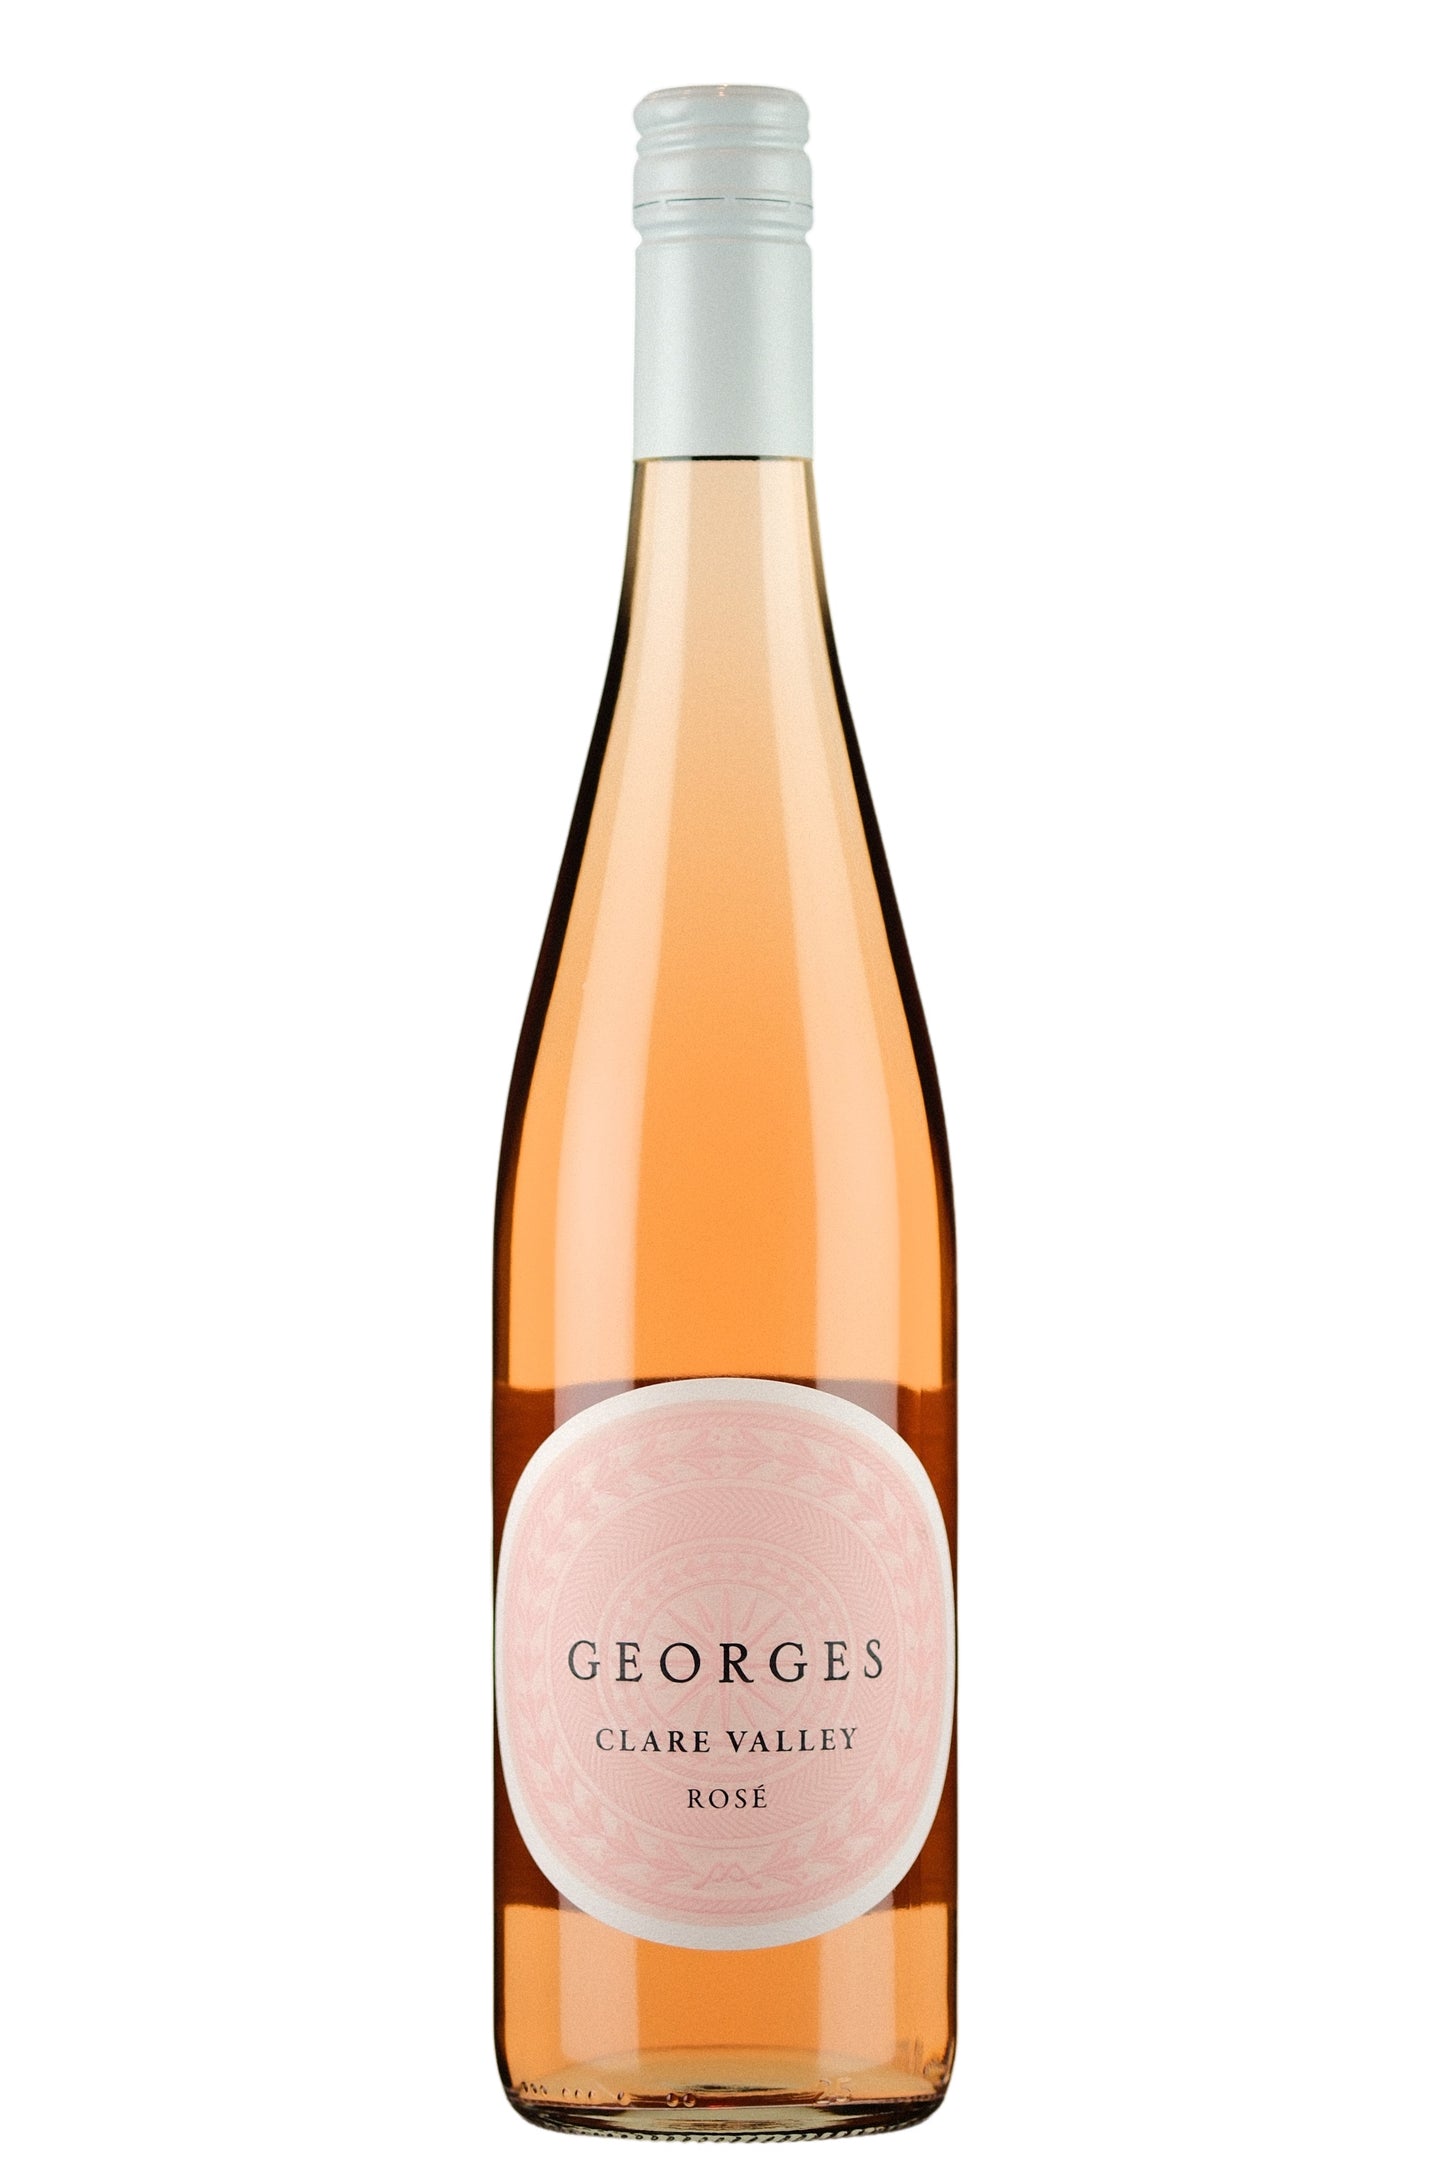 Georges Clare Valley Rose